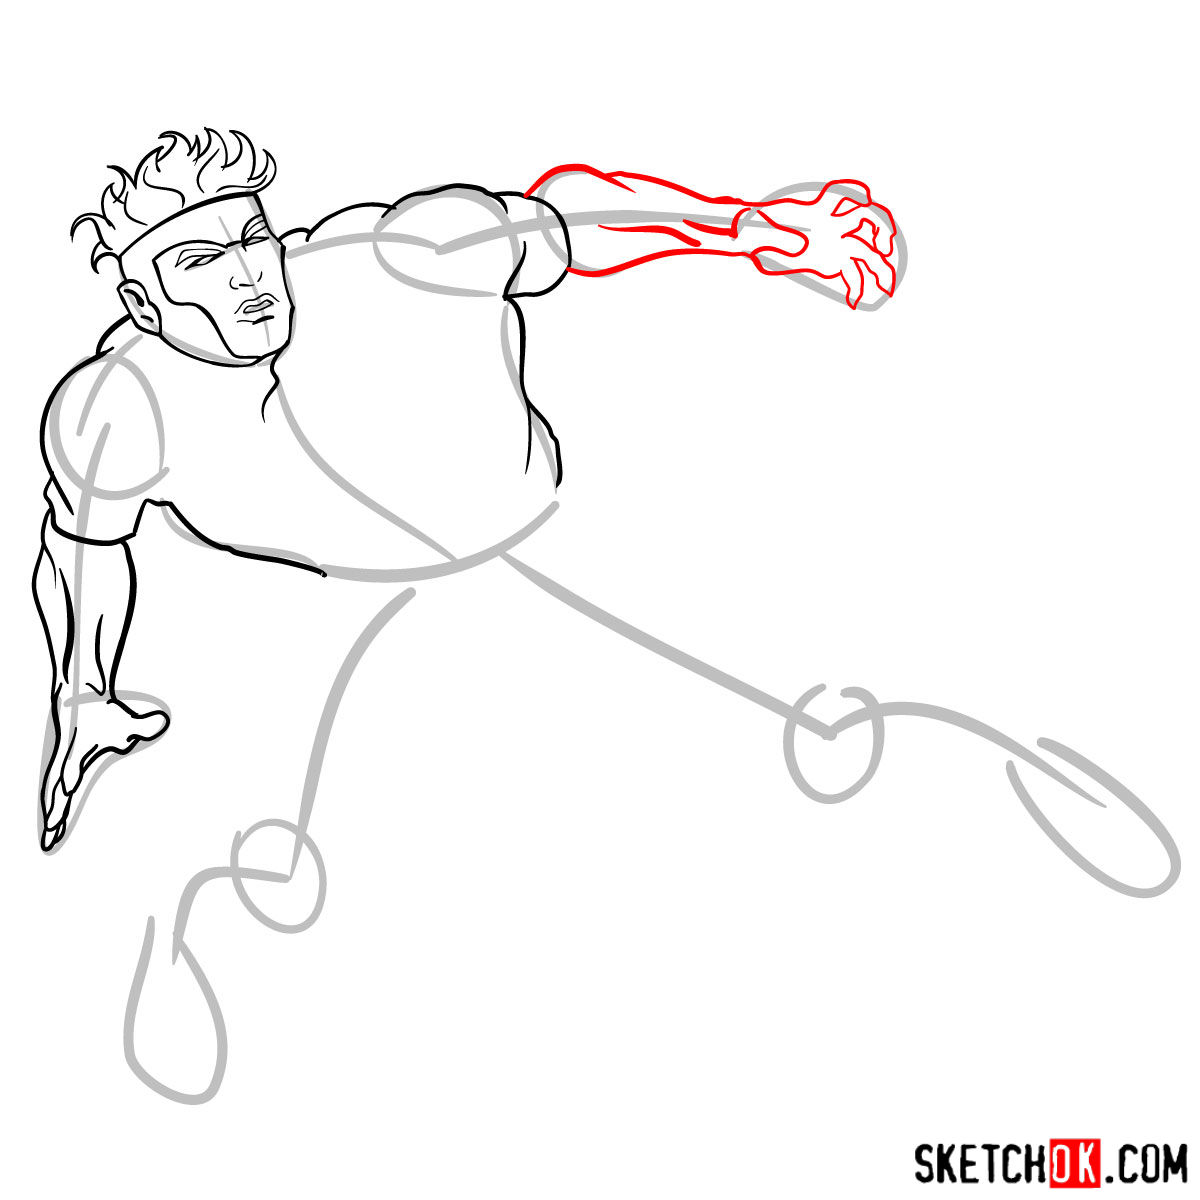 How to draw Havok from X-Men series - step by step tutorial - step 08